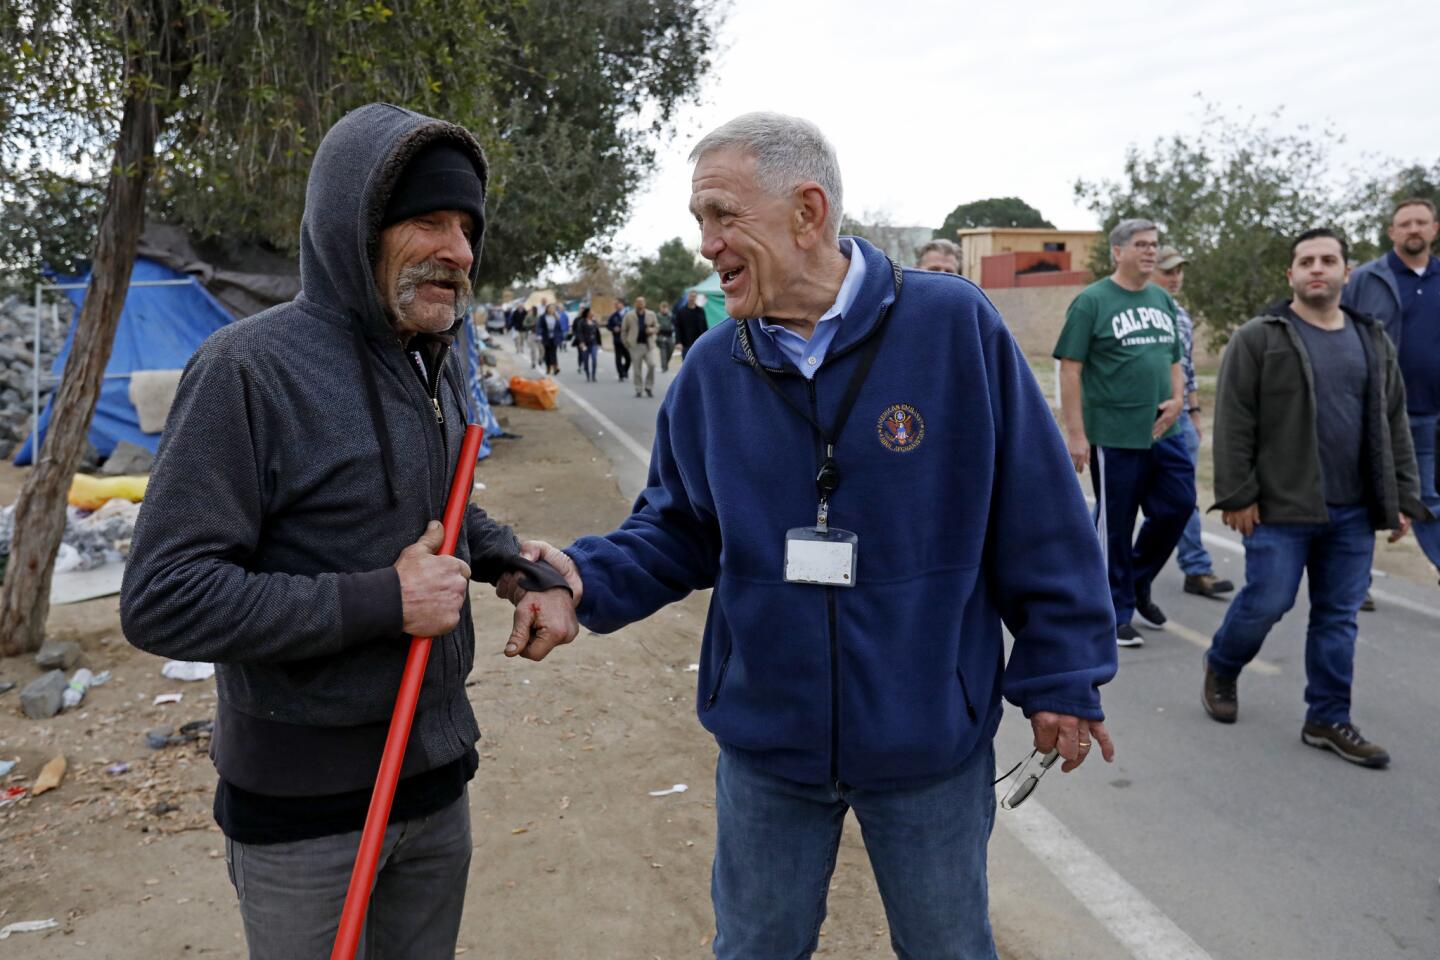 U.S. District Judge David O. Carter, right, greets Eddie S., 63, who is homeless, while surveying a homeless encampment along the Santa Ana River in Anaheim.